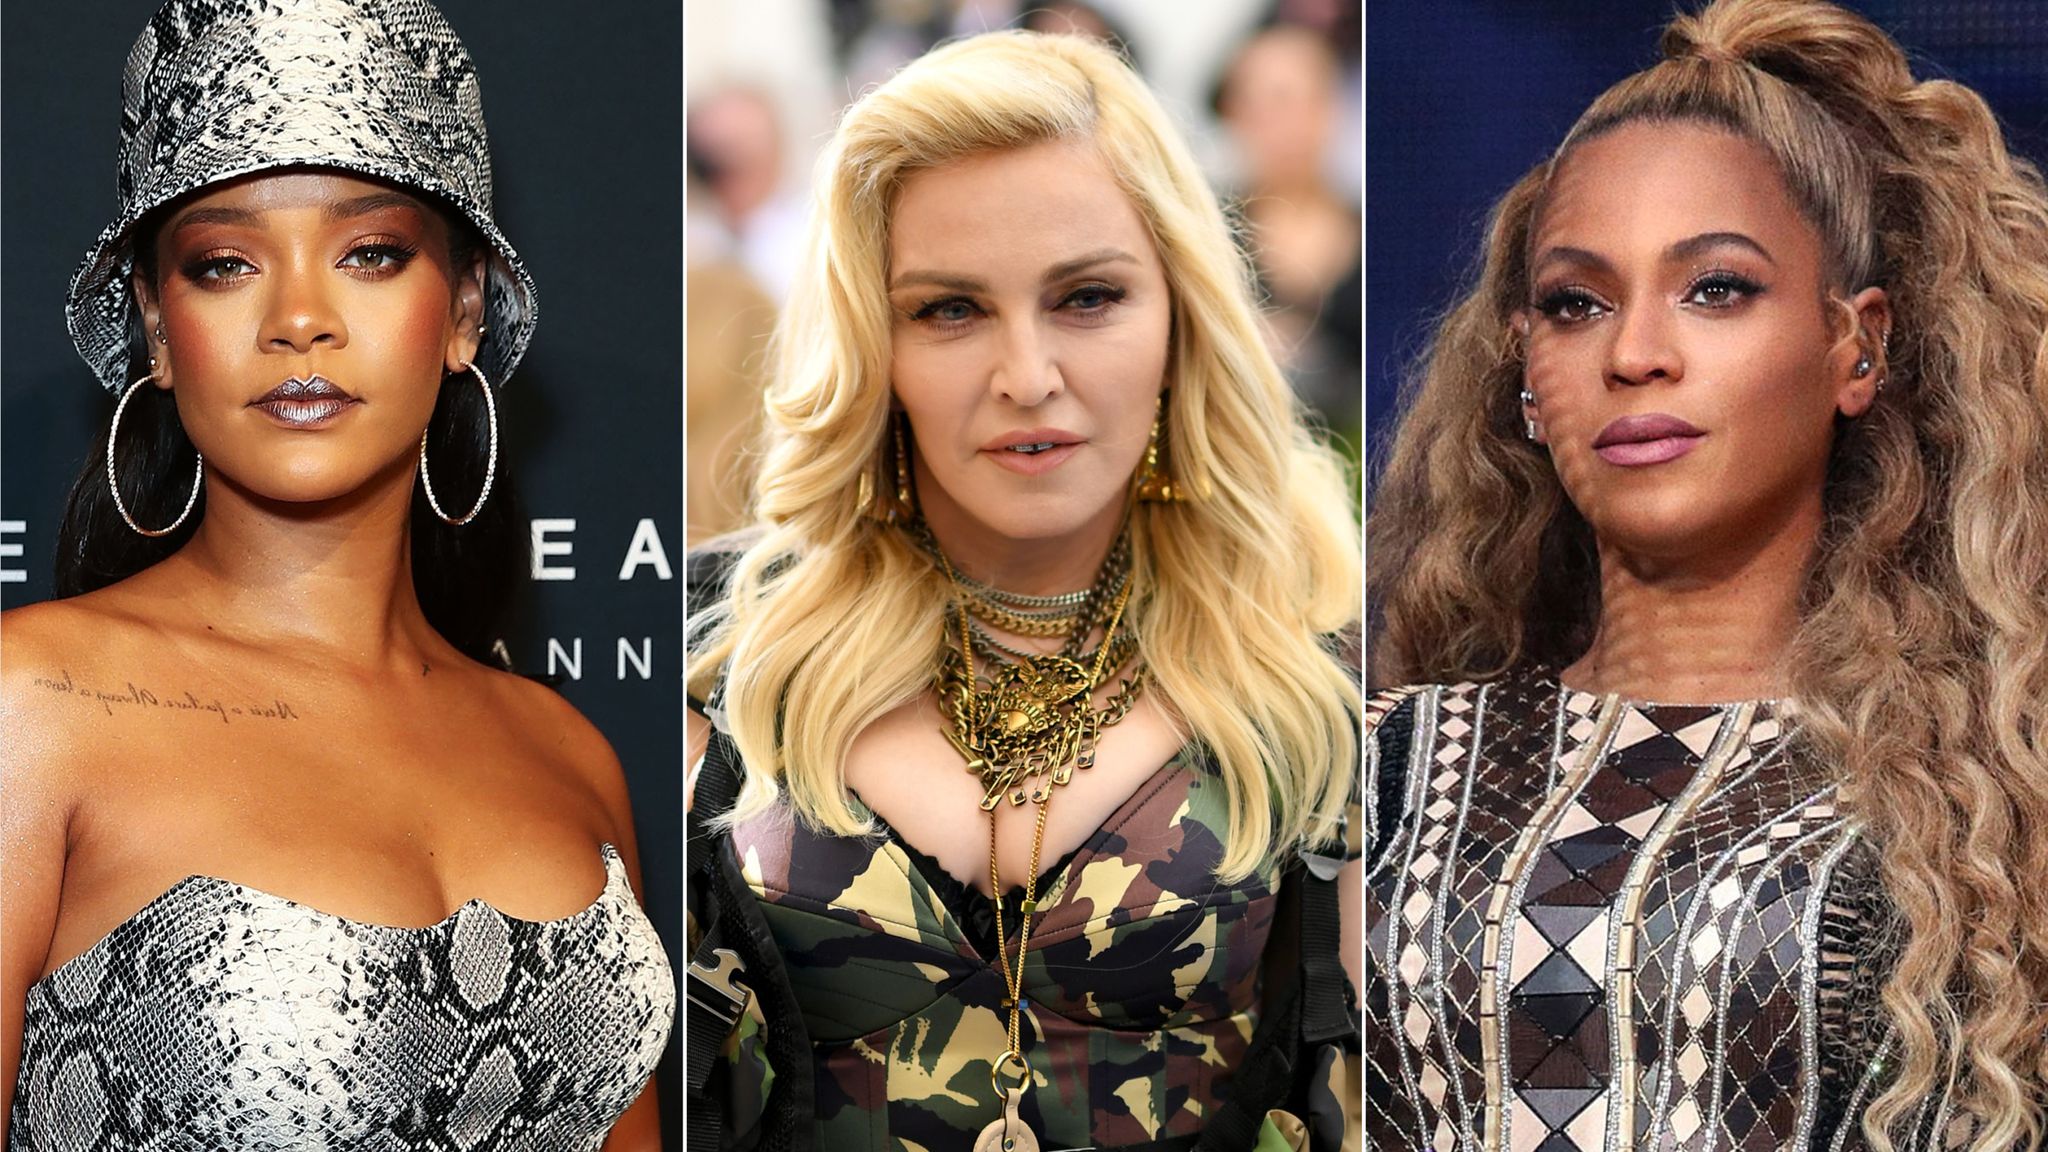 Rihanna Beyonce Or Madonna Forbes Names World S Richest Female Musician Ents Arts News Sky News